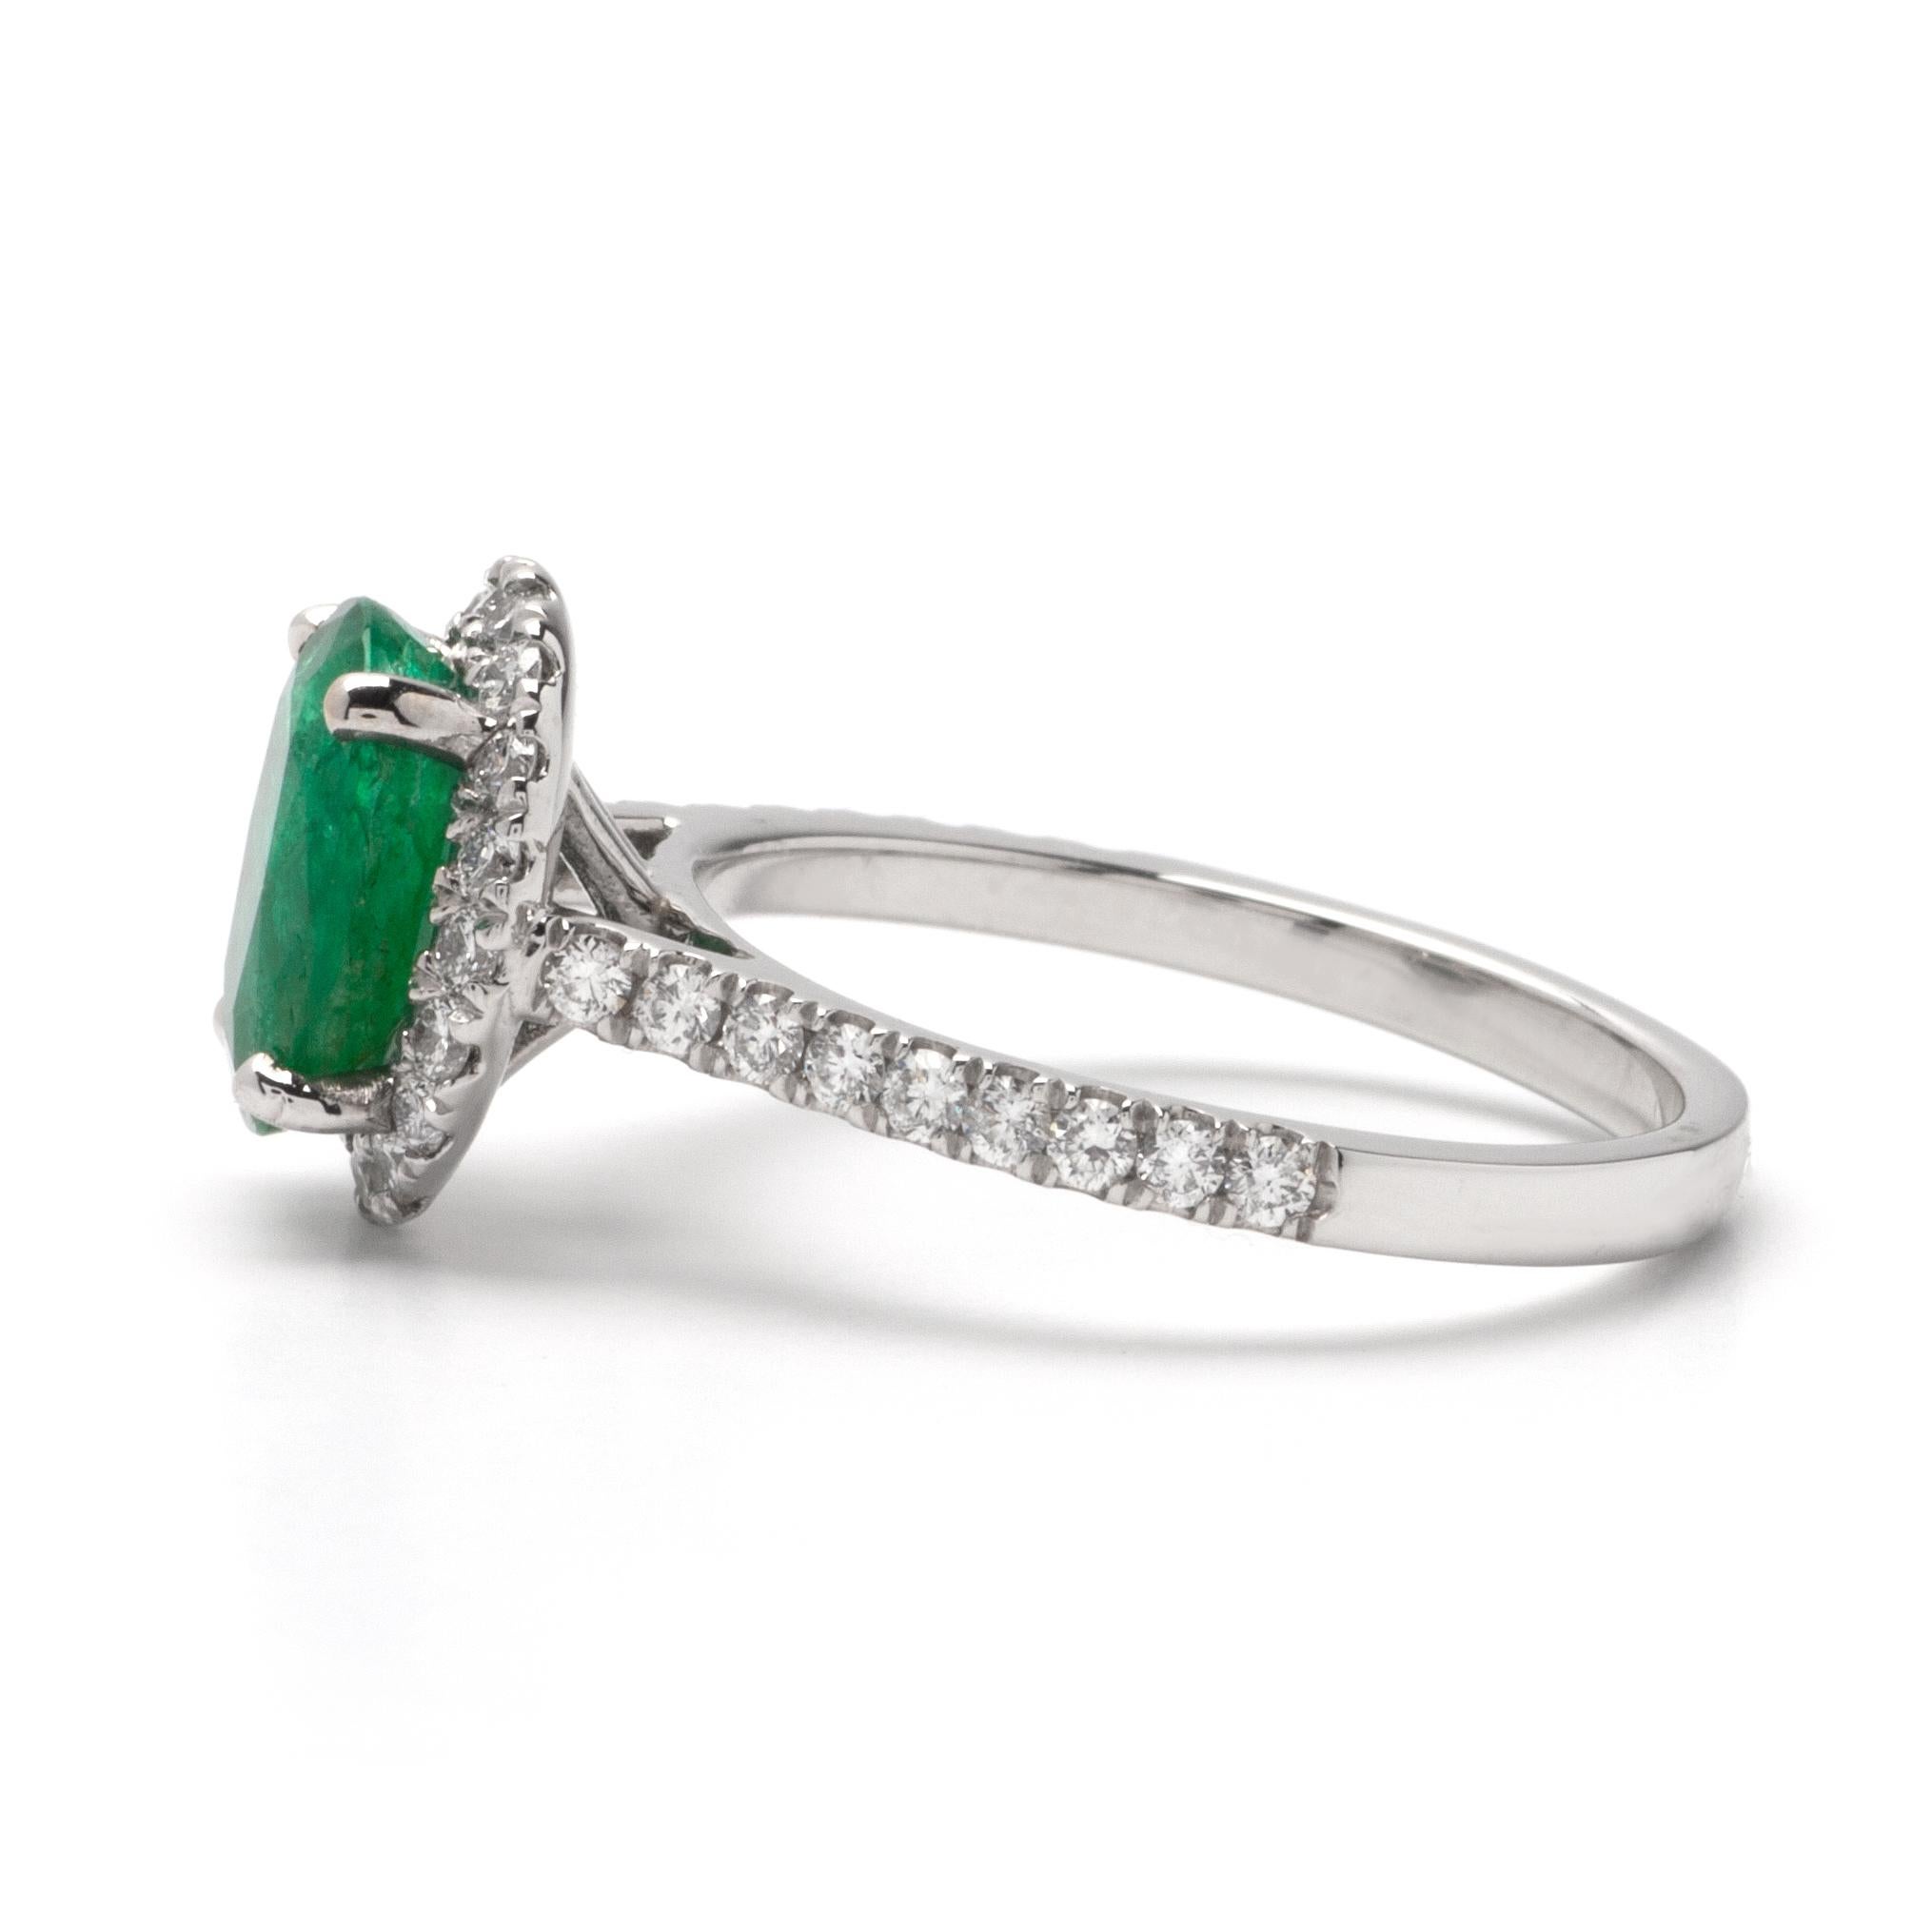 This ring features a halo design of G color, VS1 clarity, and .50ct Round side diamonds set in 14K white gold. The center gemstone is a 1.77ct oval green emerald. 